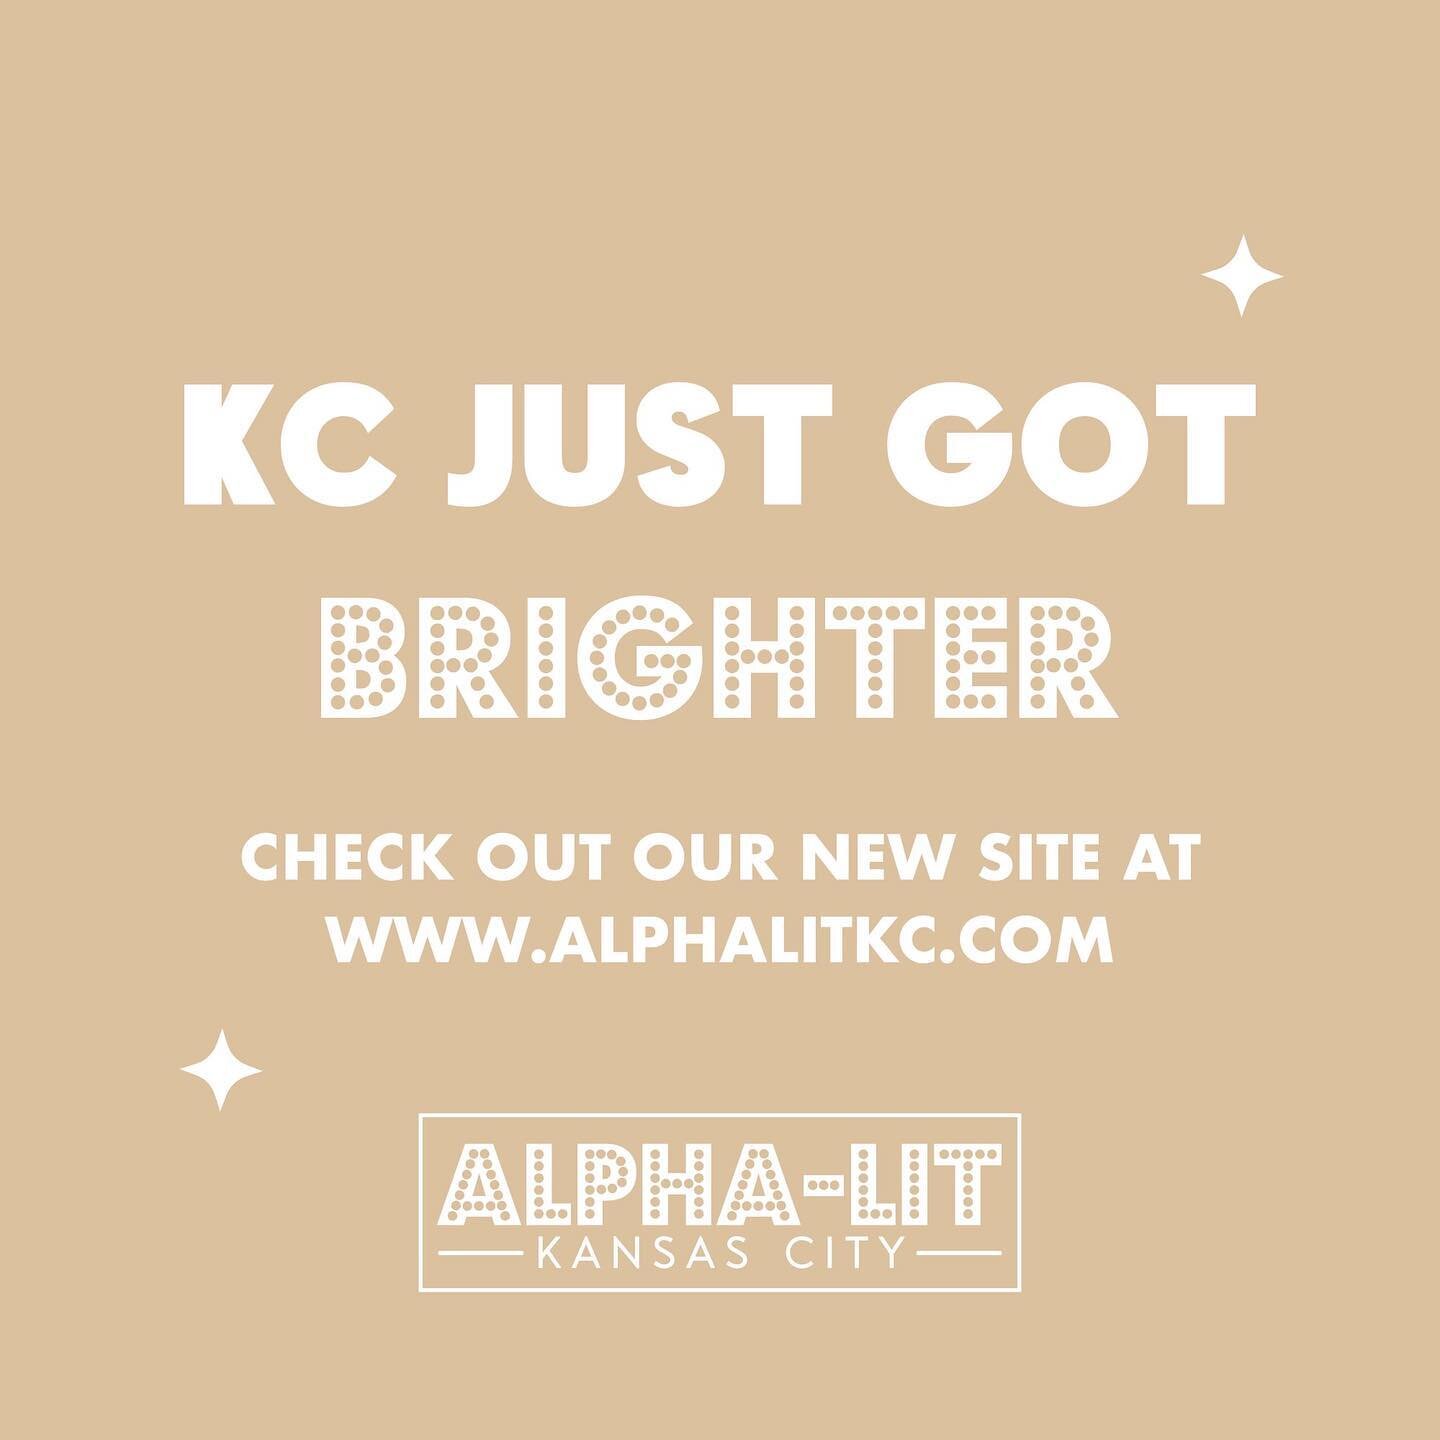 #KC✨JUST✨GOT✨BRIGHTER✨

Check out our BRIGHT NEW SITE at 💡ALPHALITKC.COM💡

Web + Digital Design by @priaandco